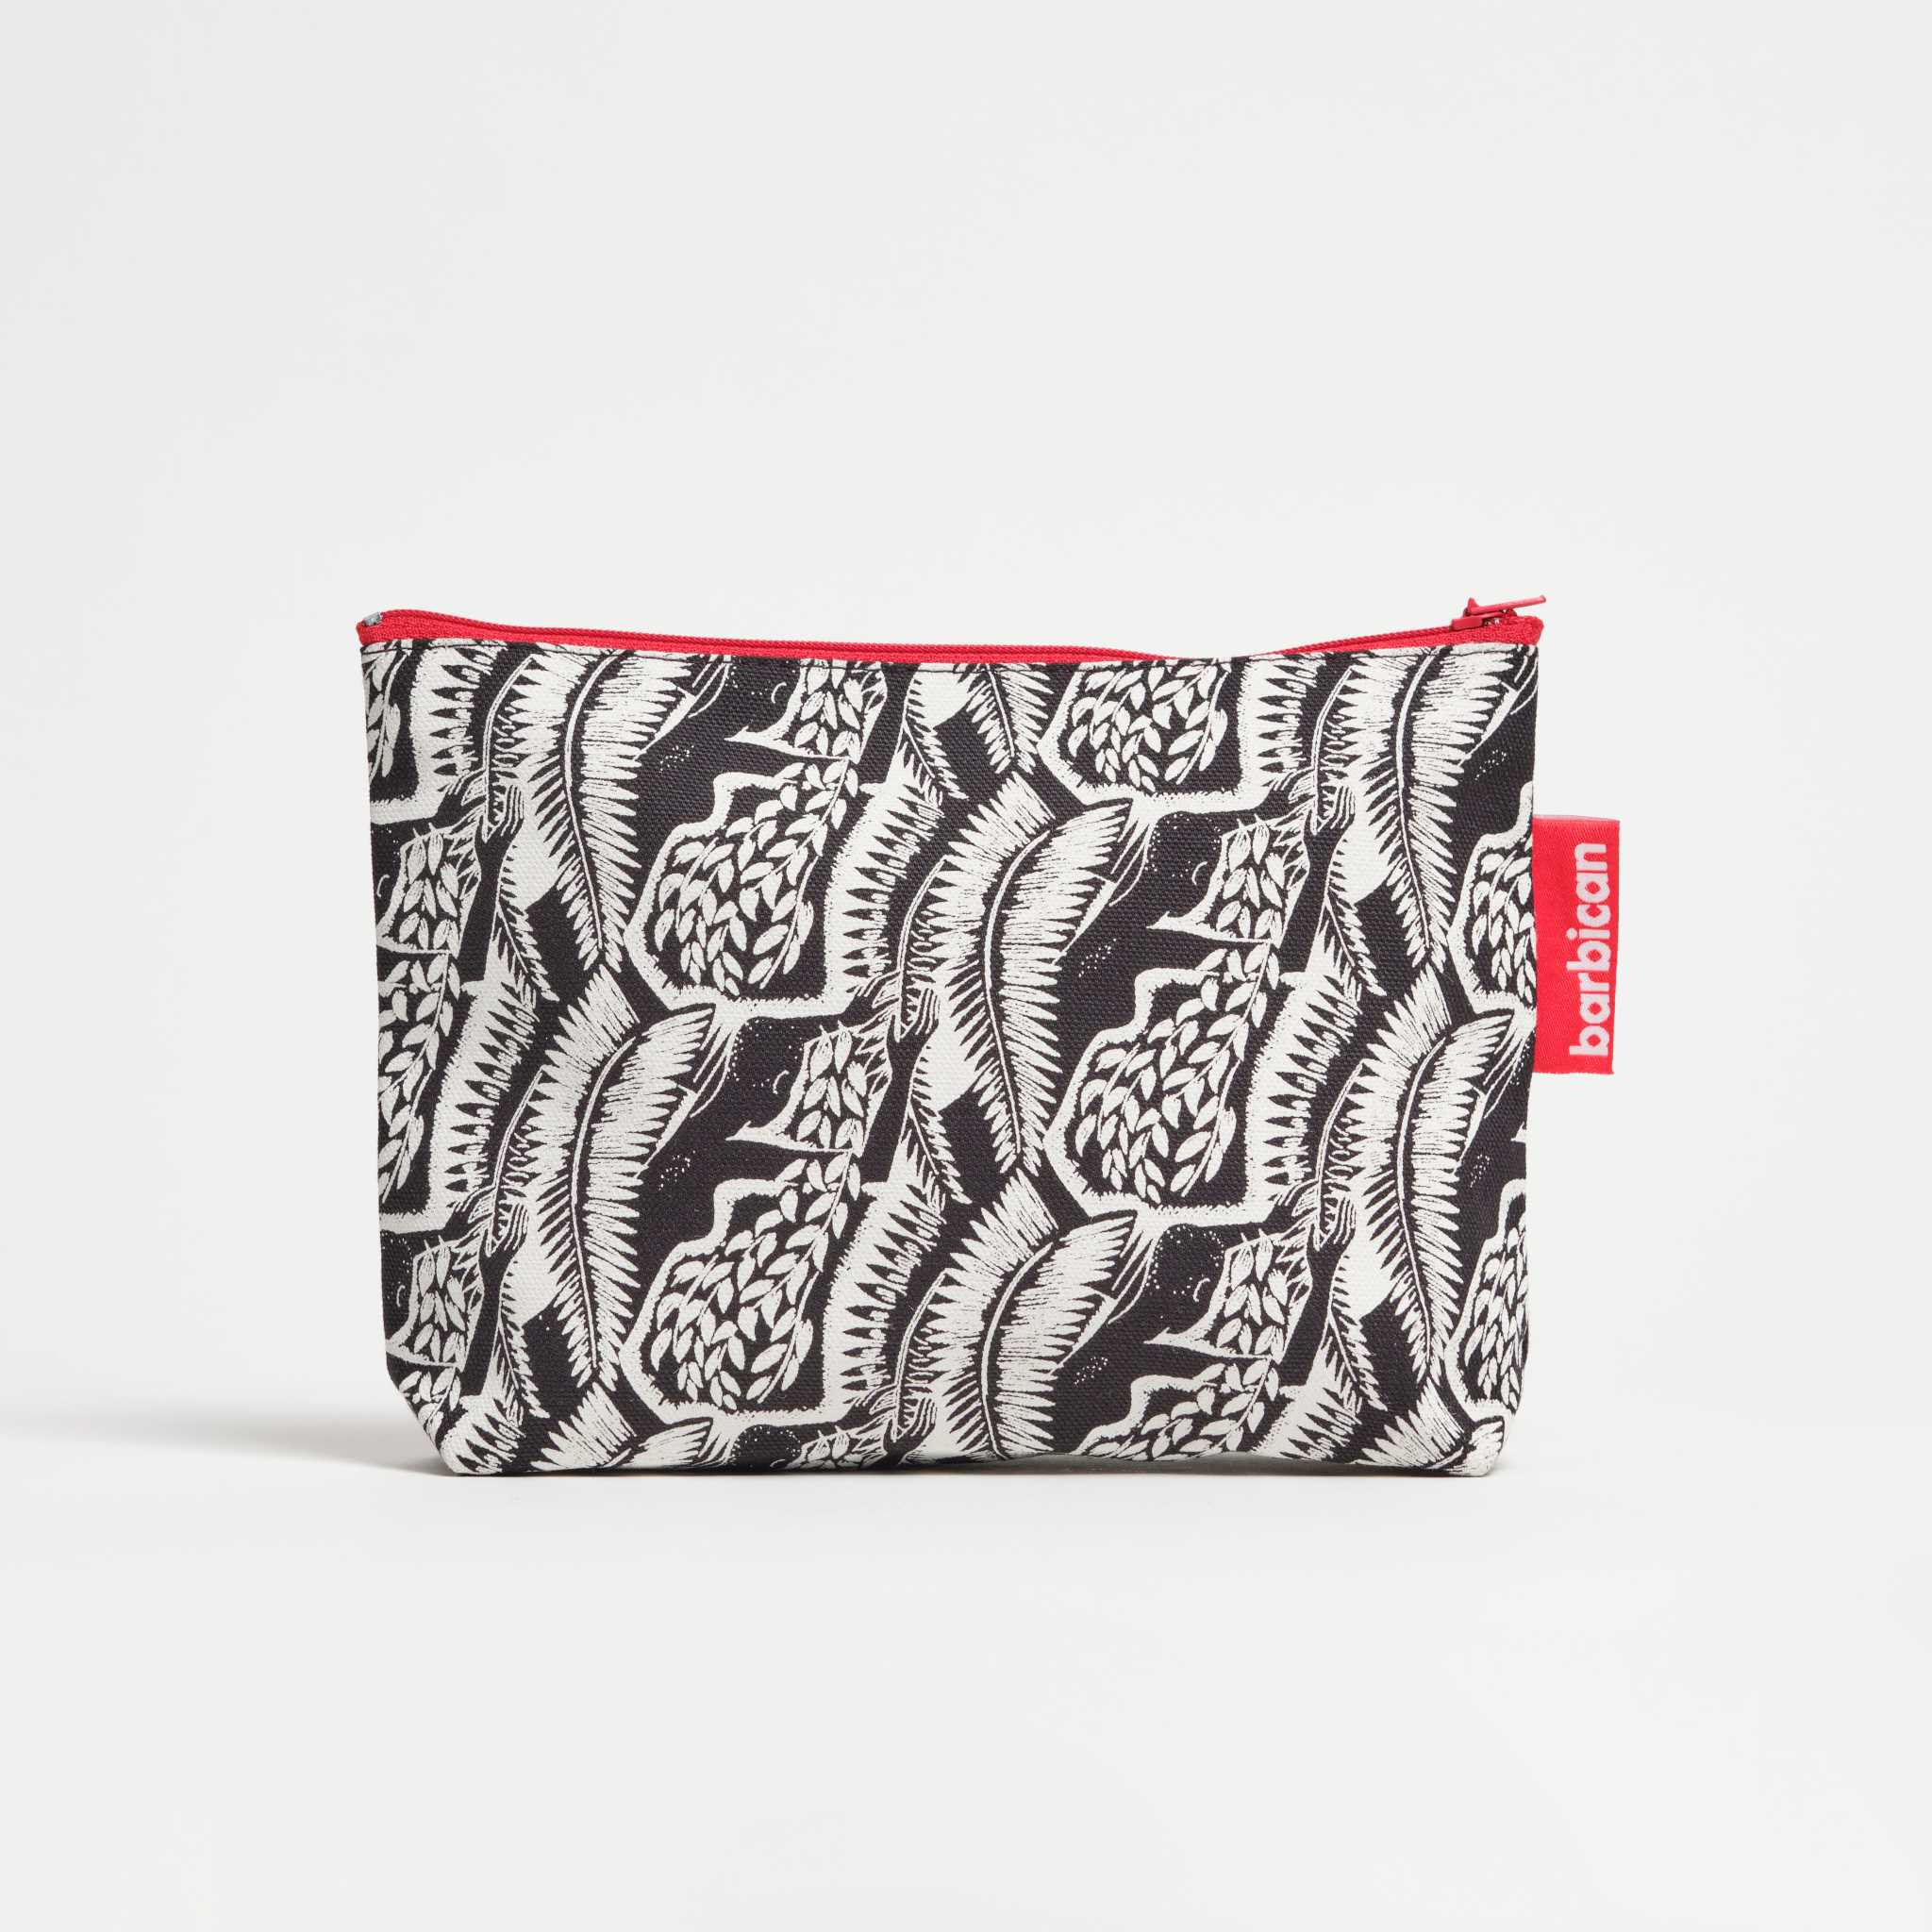 Carrie Mae Weems Looking High and Low Cosmetic Pouch